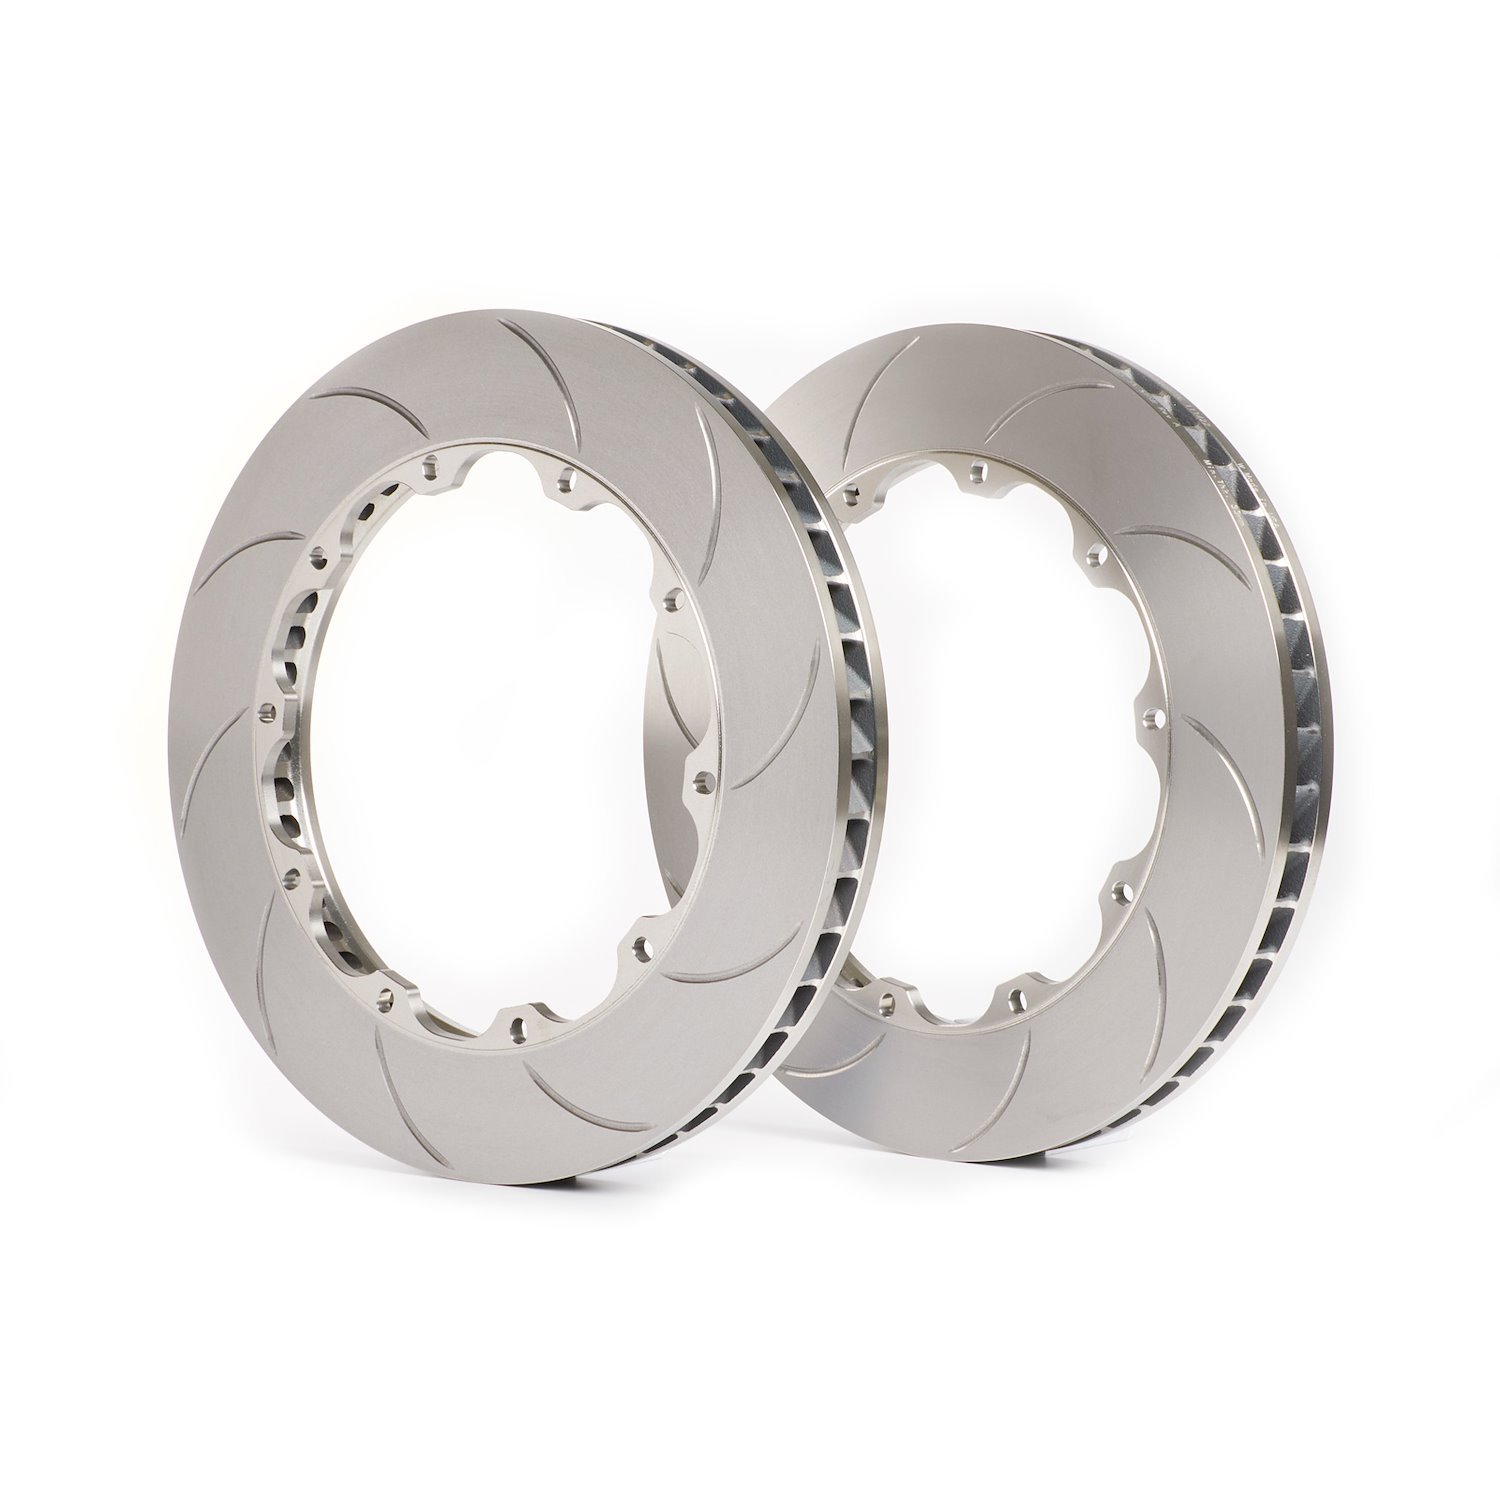 D1-066 Replacement Rotor Rings, 380 x 34 mm